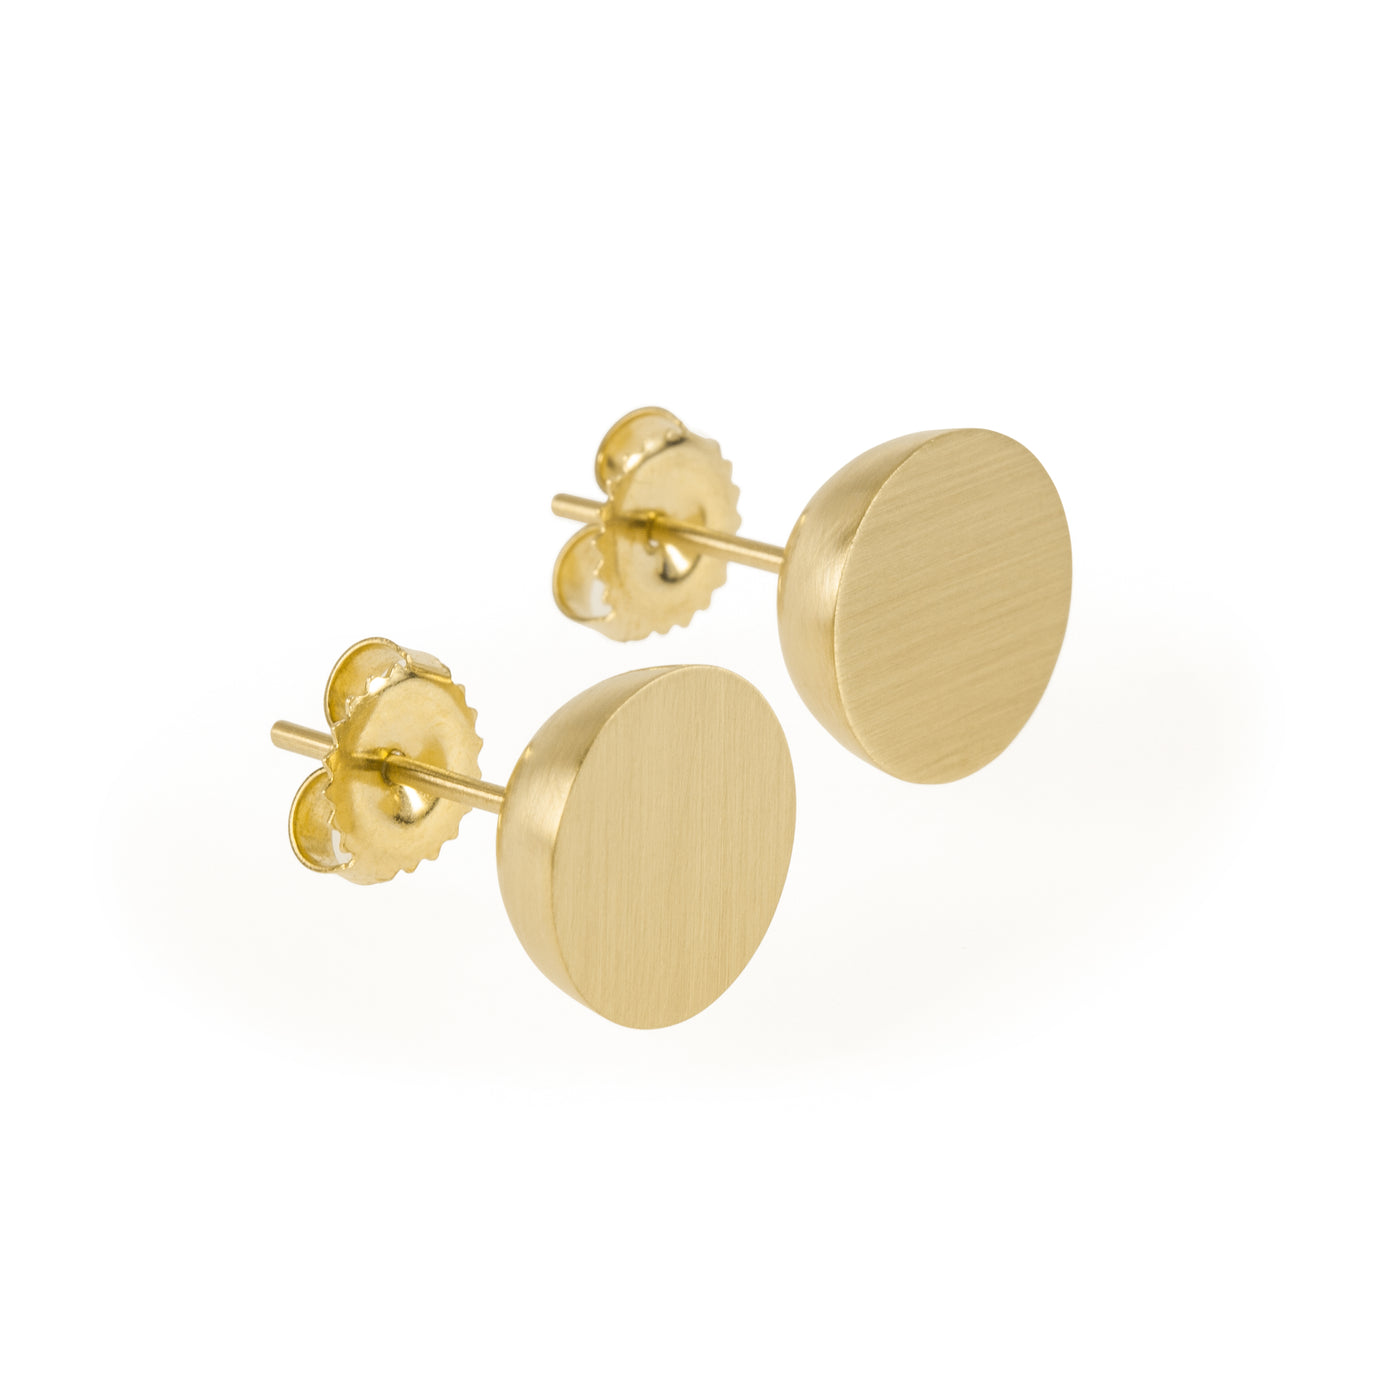 Eco-friendly gold earrings. These minimalist 11mm Hemisphere Studs are handmade in Cape Town in recycled gold.